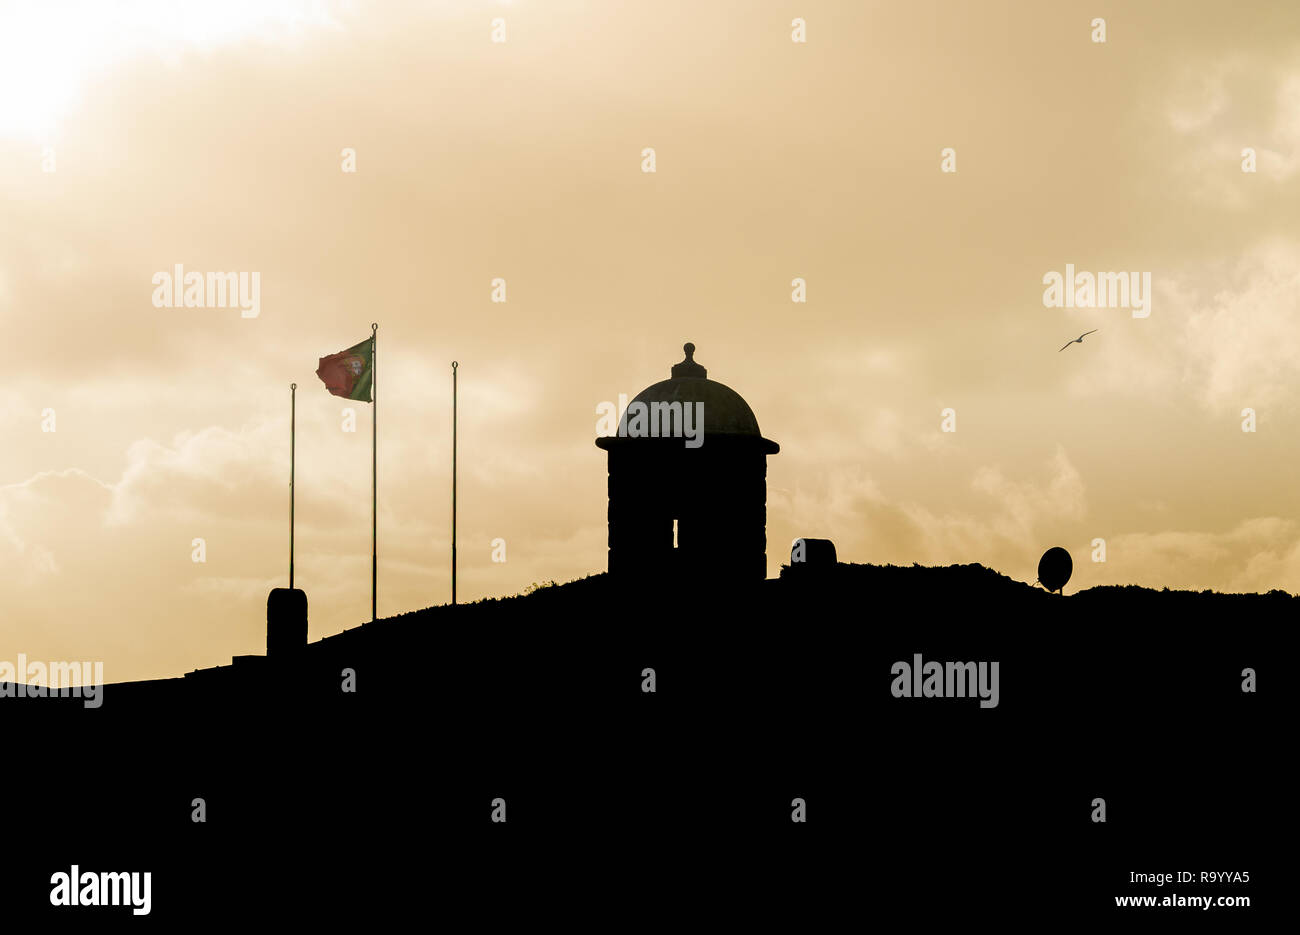 Silhouette of a small castle with a portuguese flag waving in the wind and a seagull flying by. Sunset. Copy space. Stock Photo